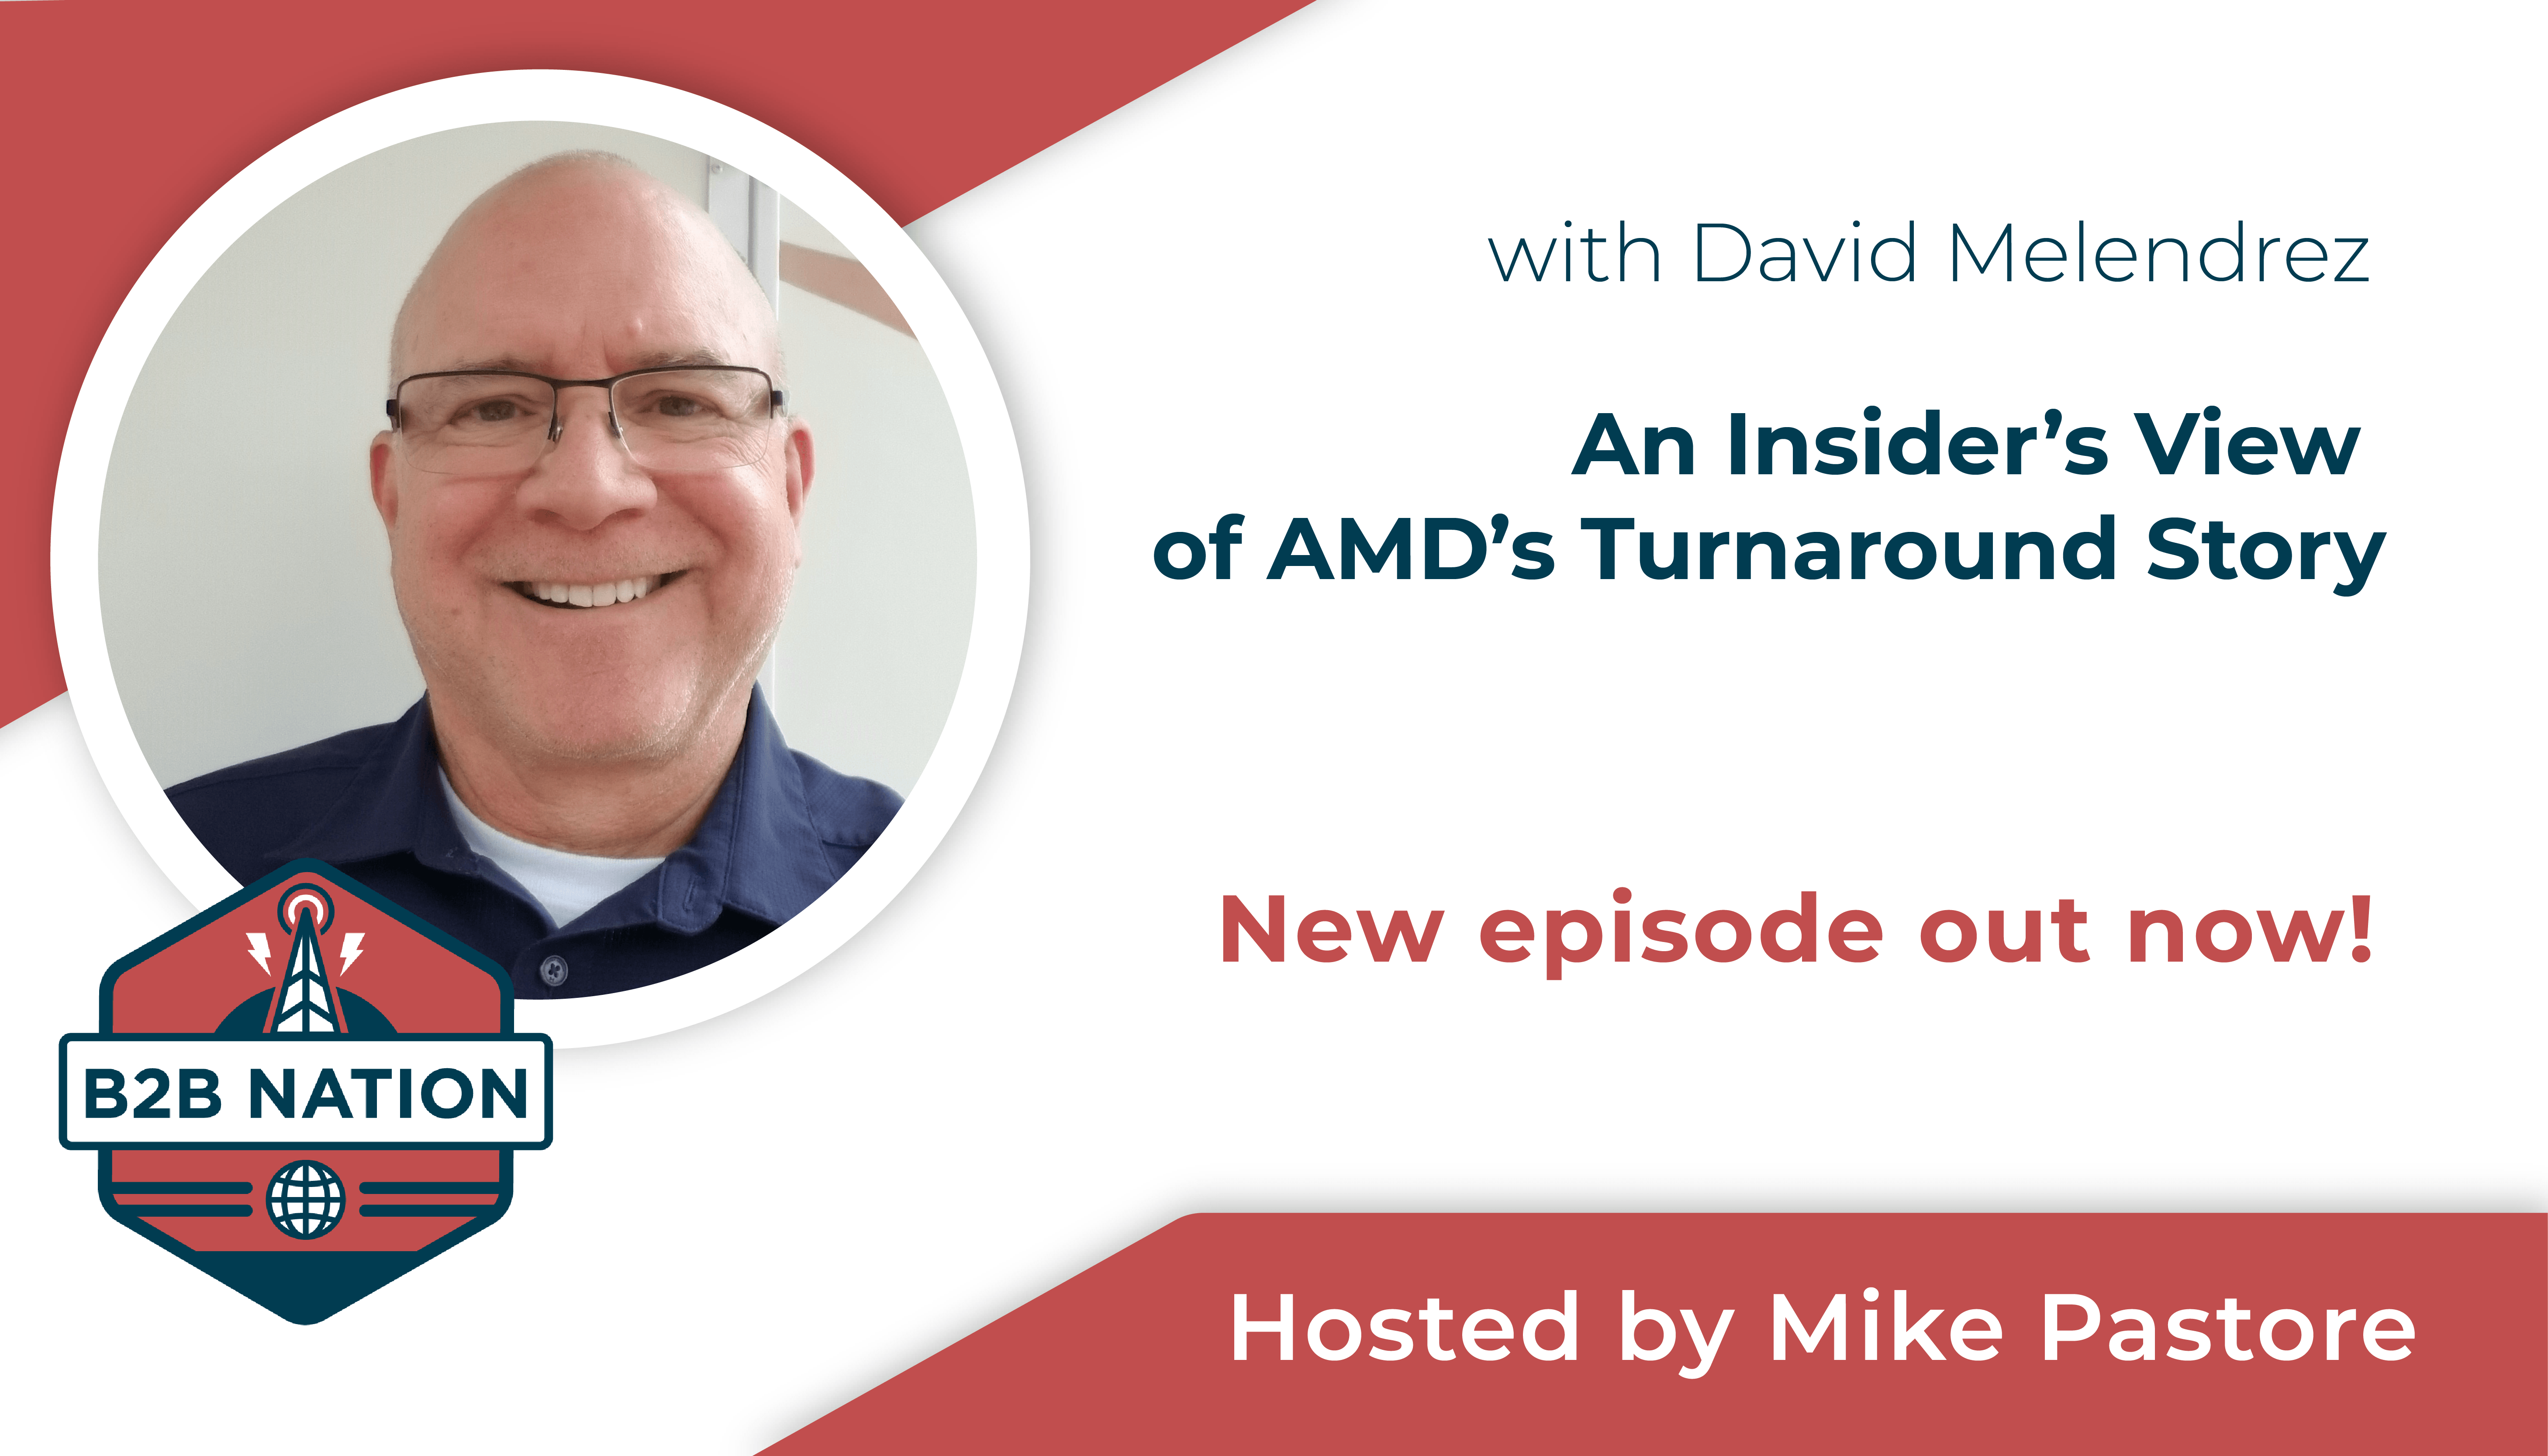 An Insider’s View of AMD’s Turnaround Story